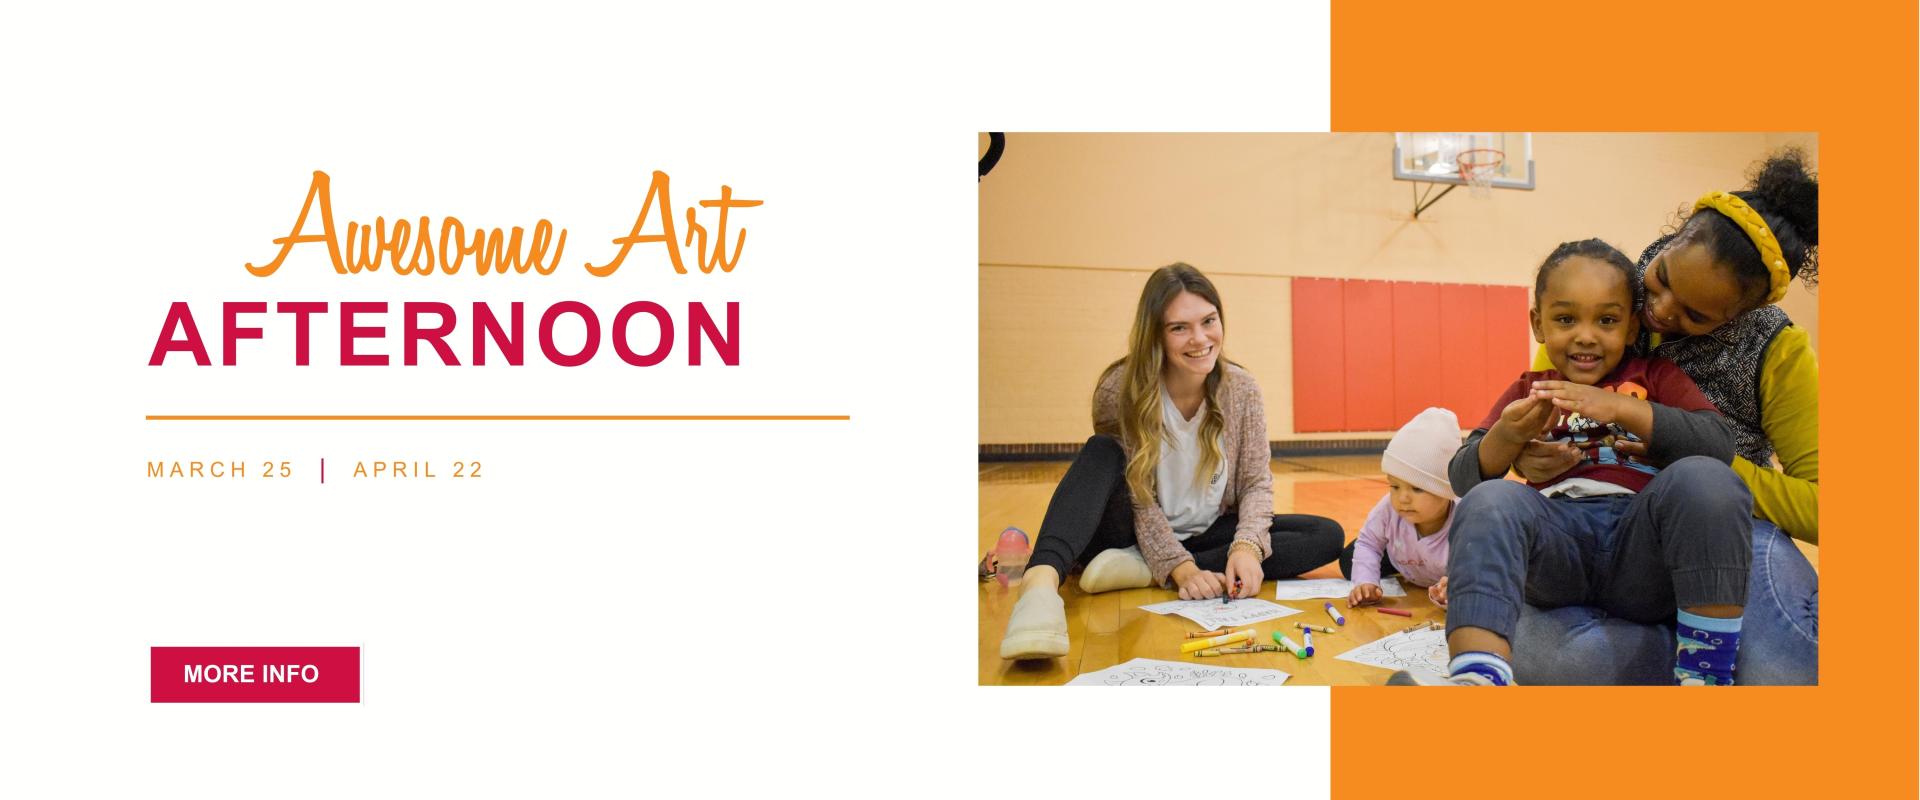 Awesome Art Afternoon text with Mar 25 - Apr 22 with a more info red button, with image of two women sitting on the gym floor coloring with their 2 children